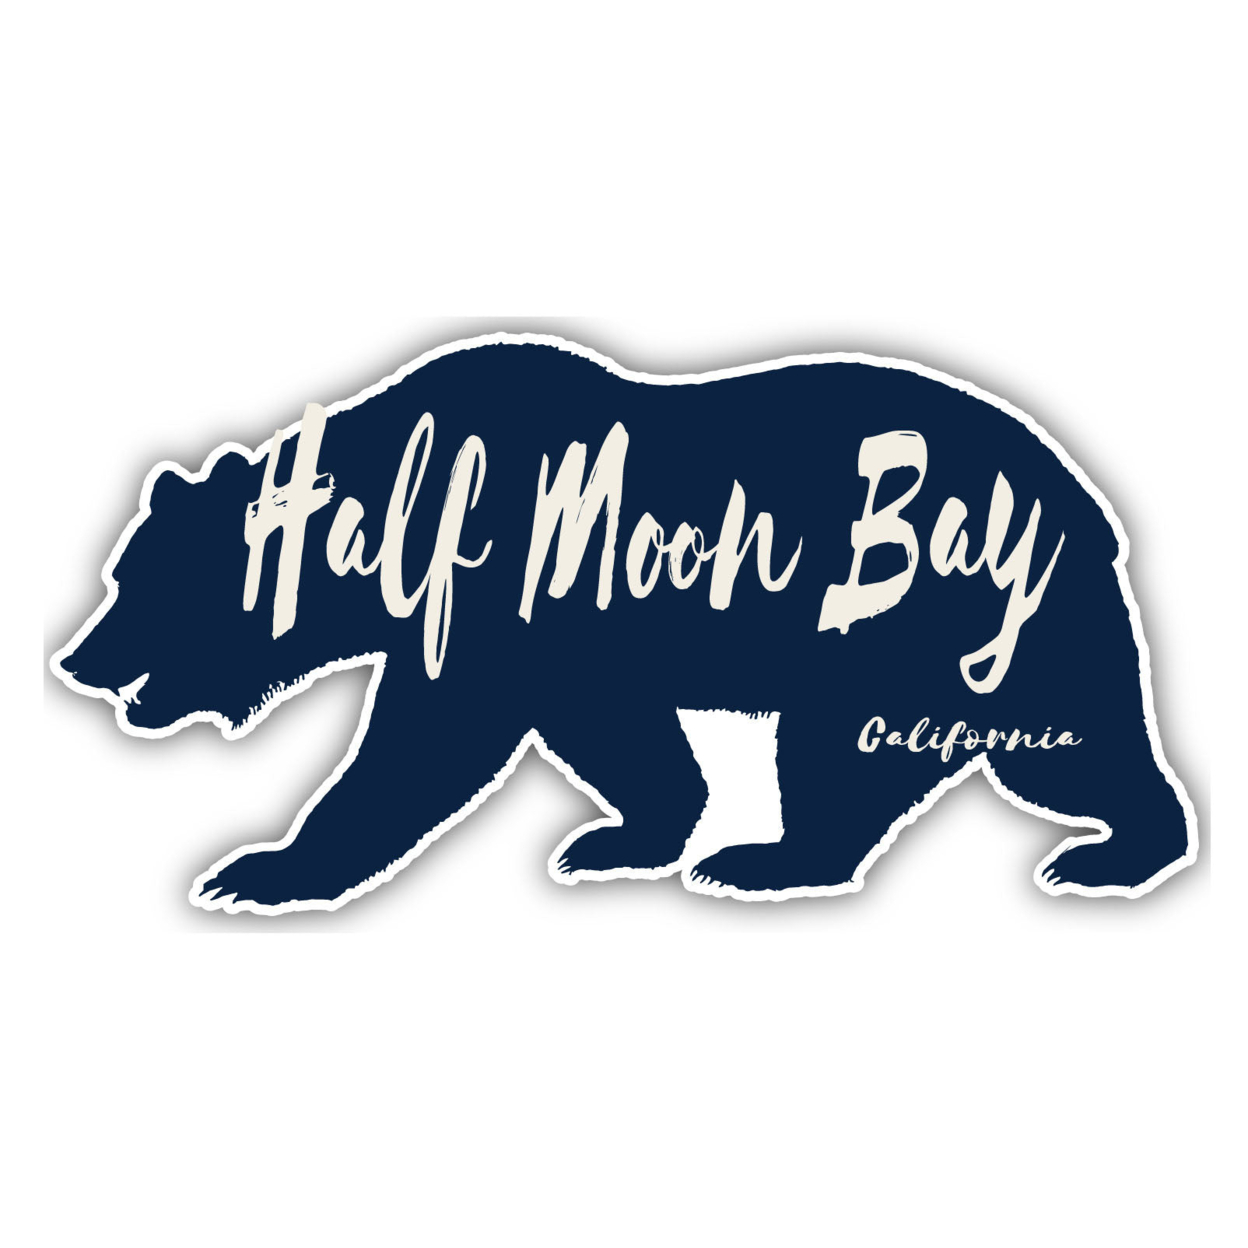 Half Moon Bay California Souvenir Decorative Stickers (Choose Theme And Size) - 4-Pack, 10-Inch, Bear